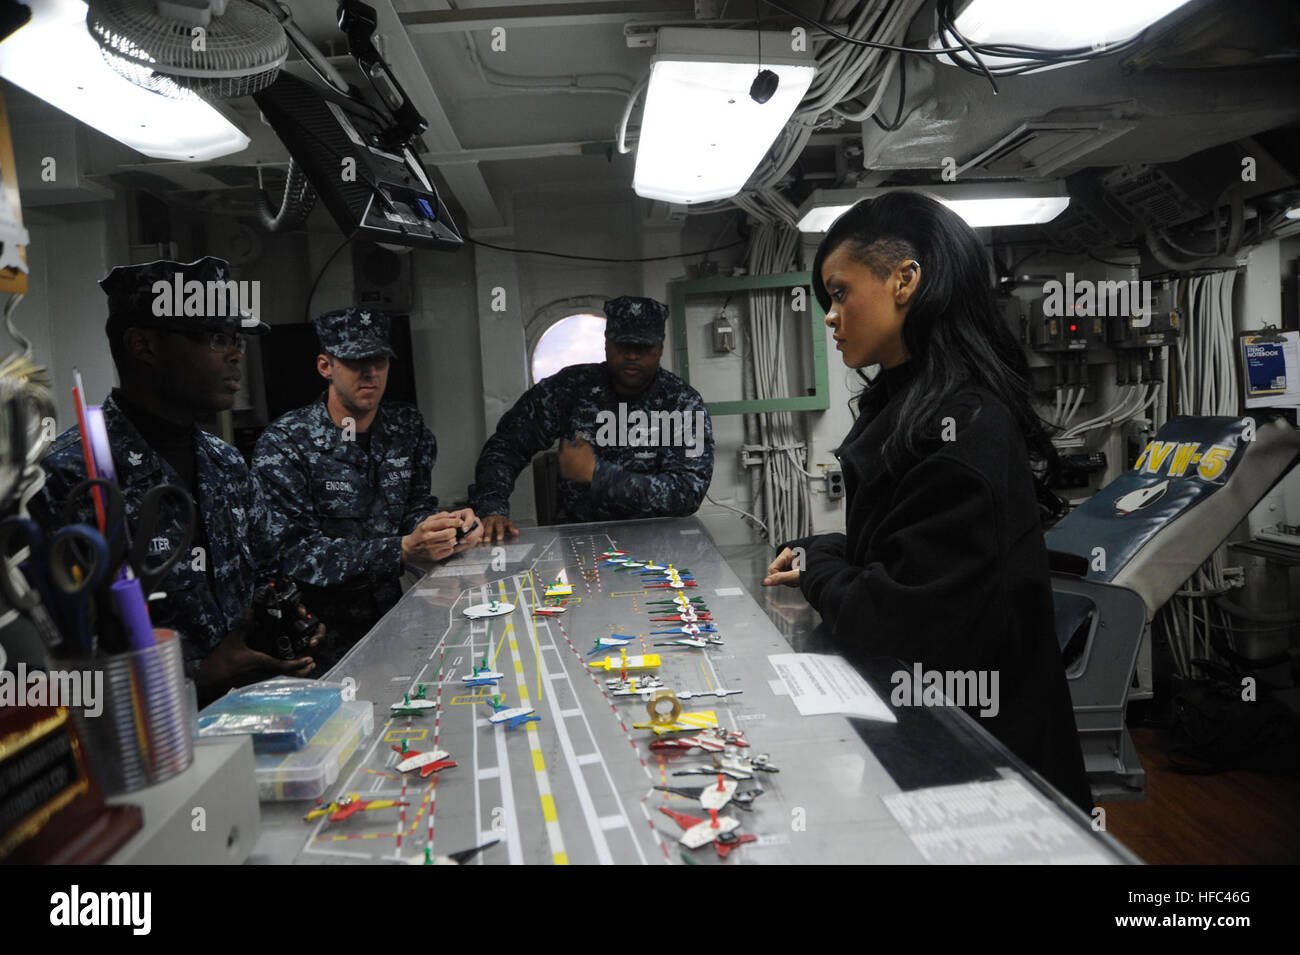 Sailors aboard the Nimitz-class aircraft carrier USS George Washington (CVN 73) discuss the Ouija board with singer/actress Robyn 'Rihanna' Fenty during a post press conference tour of the ship. George Washington hosted a news conference between 150 international journalists and the director and cast of the movie Battleship on the flight deck of the Navy's only full-time forward deployed aircraft carrier. (U.S. Navy photo by: Mass Communication Specialist Seaman Apprentice Brian H. Abel/Released) 'Battleship' stars aboard USS George Washington 120402-N-ZT599-390 Stock Photo